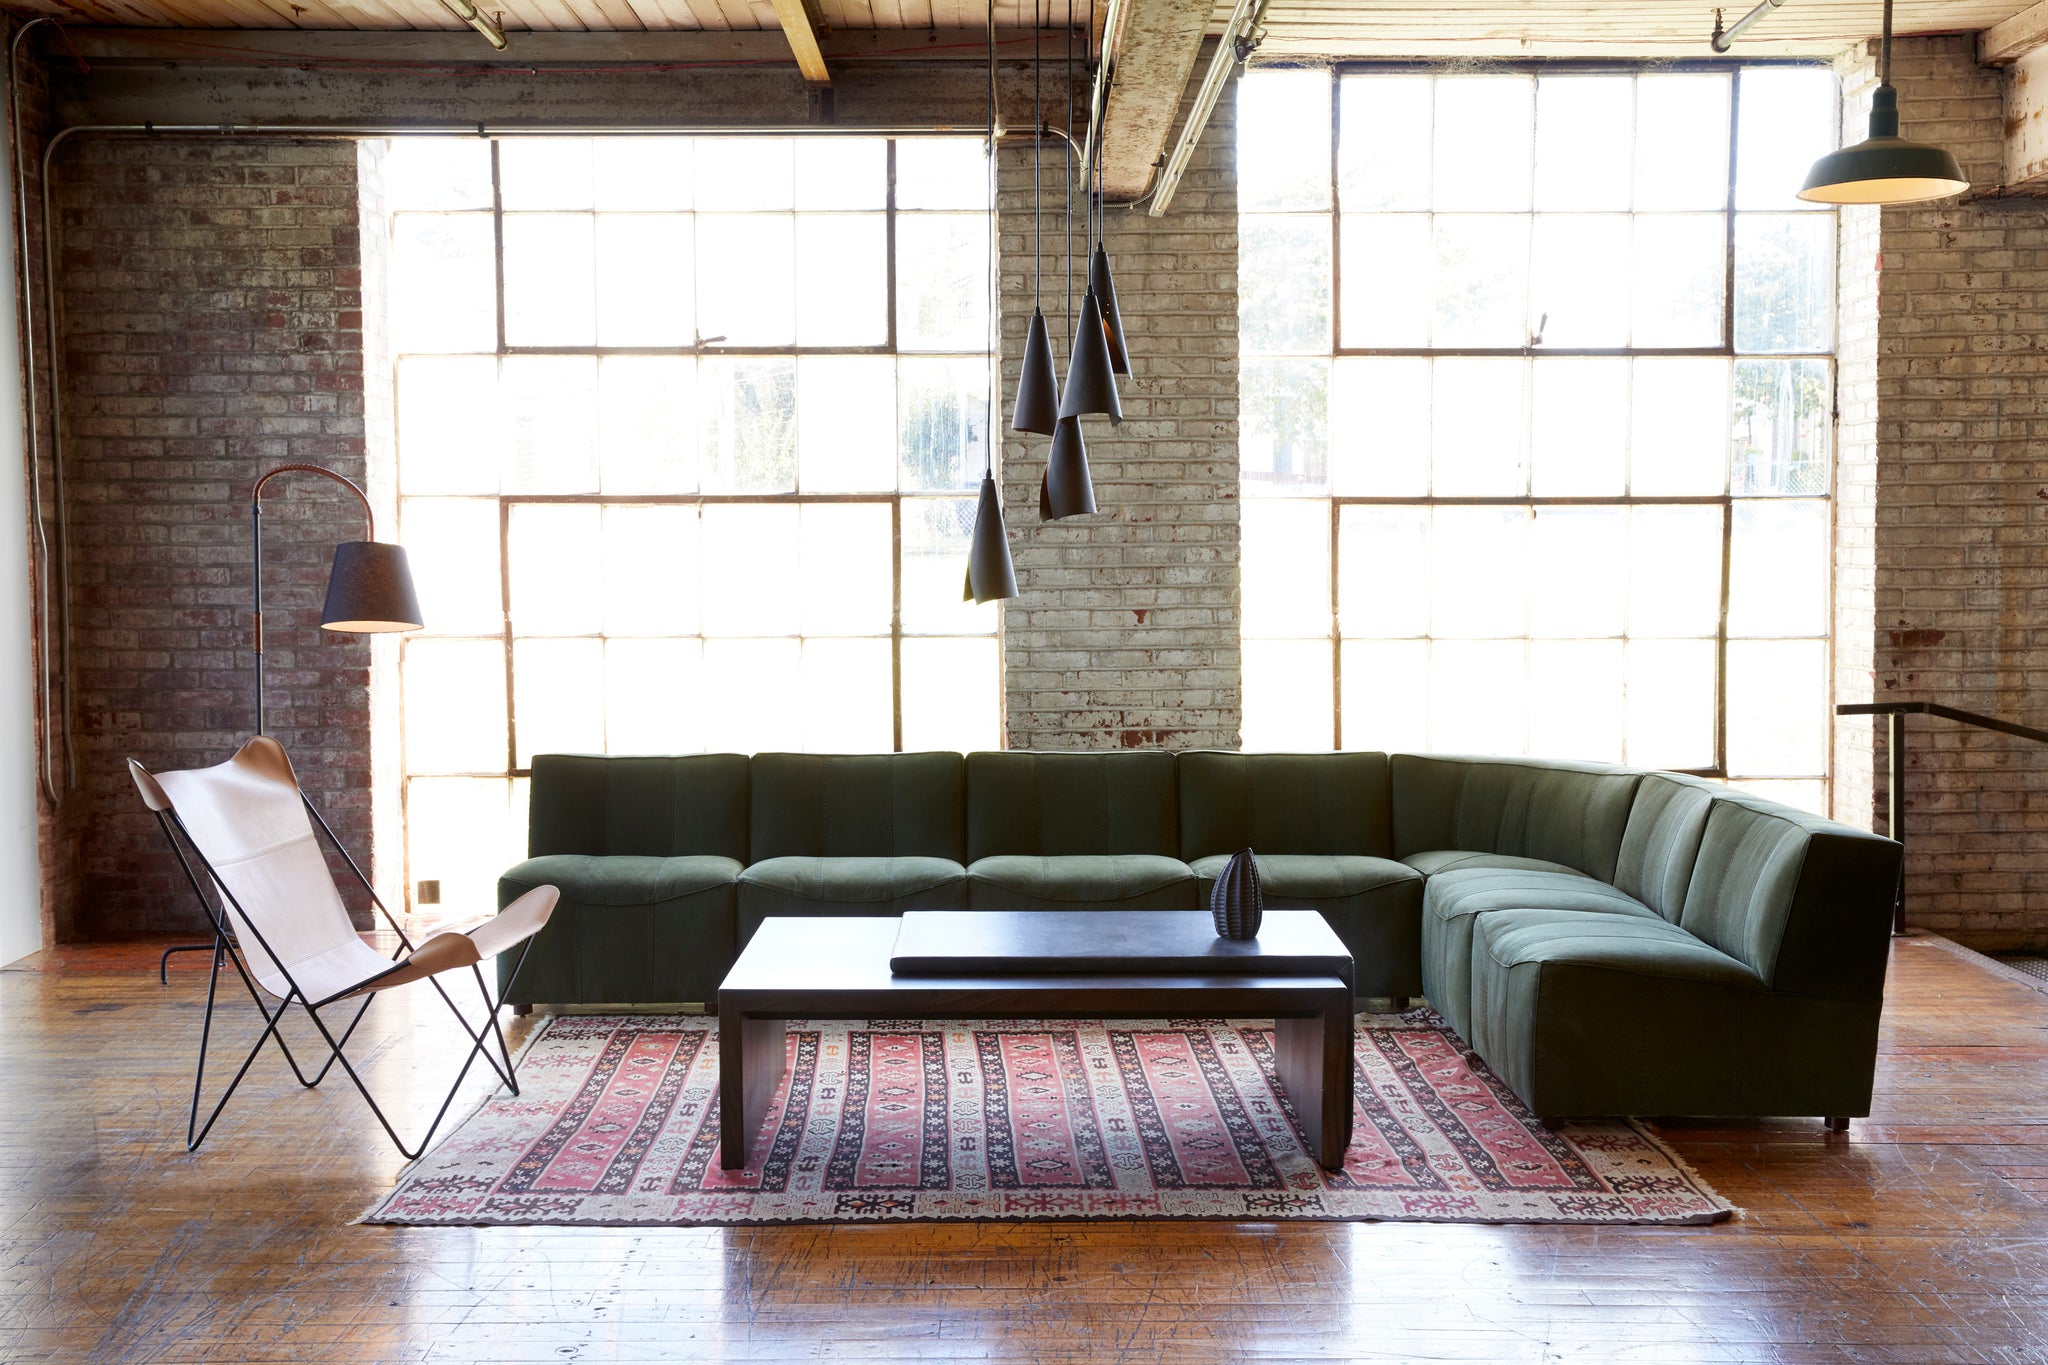  Century Sectional sits in the middle of a room with a wood coffee table and leather chairs. There is also a red patterned rug underneath the pieces. In the background is a brick wall with large windows. Above the pieces hangs multiple lighting lamps. Photographed in Hunter Green. 